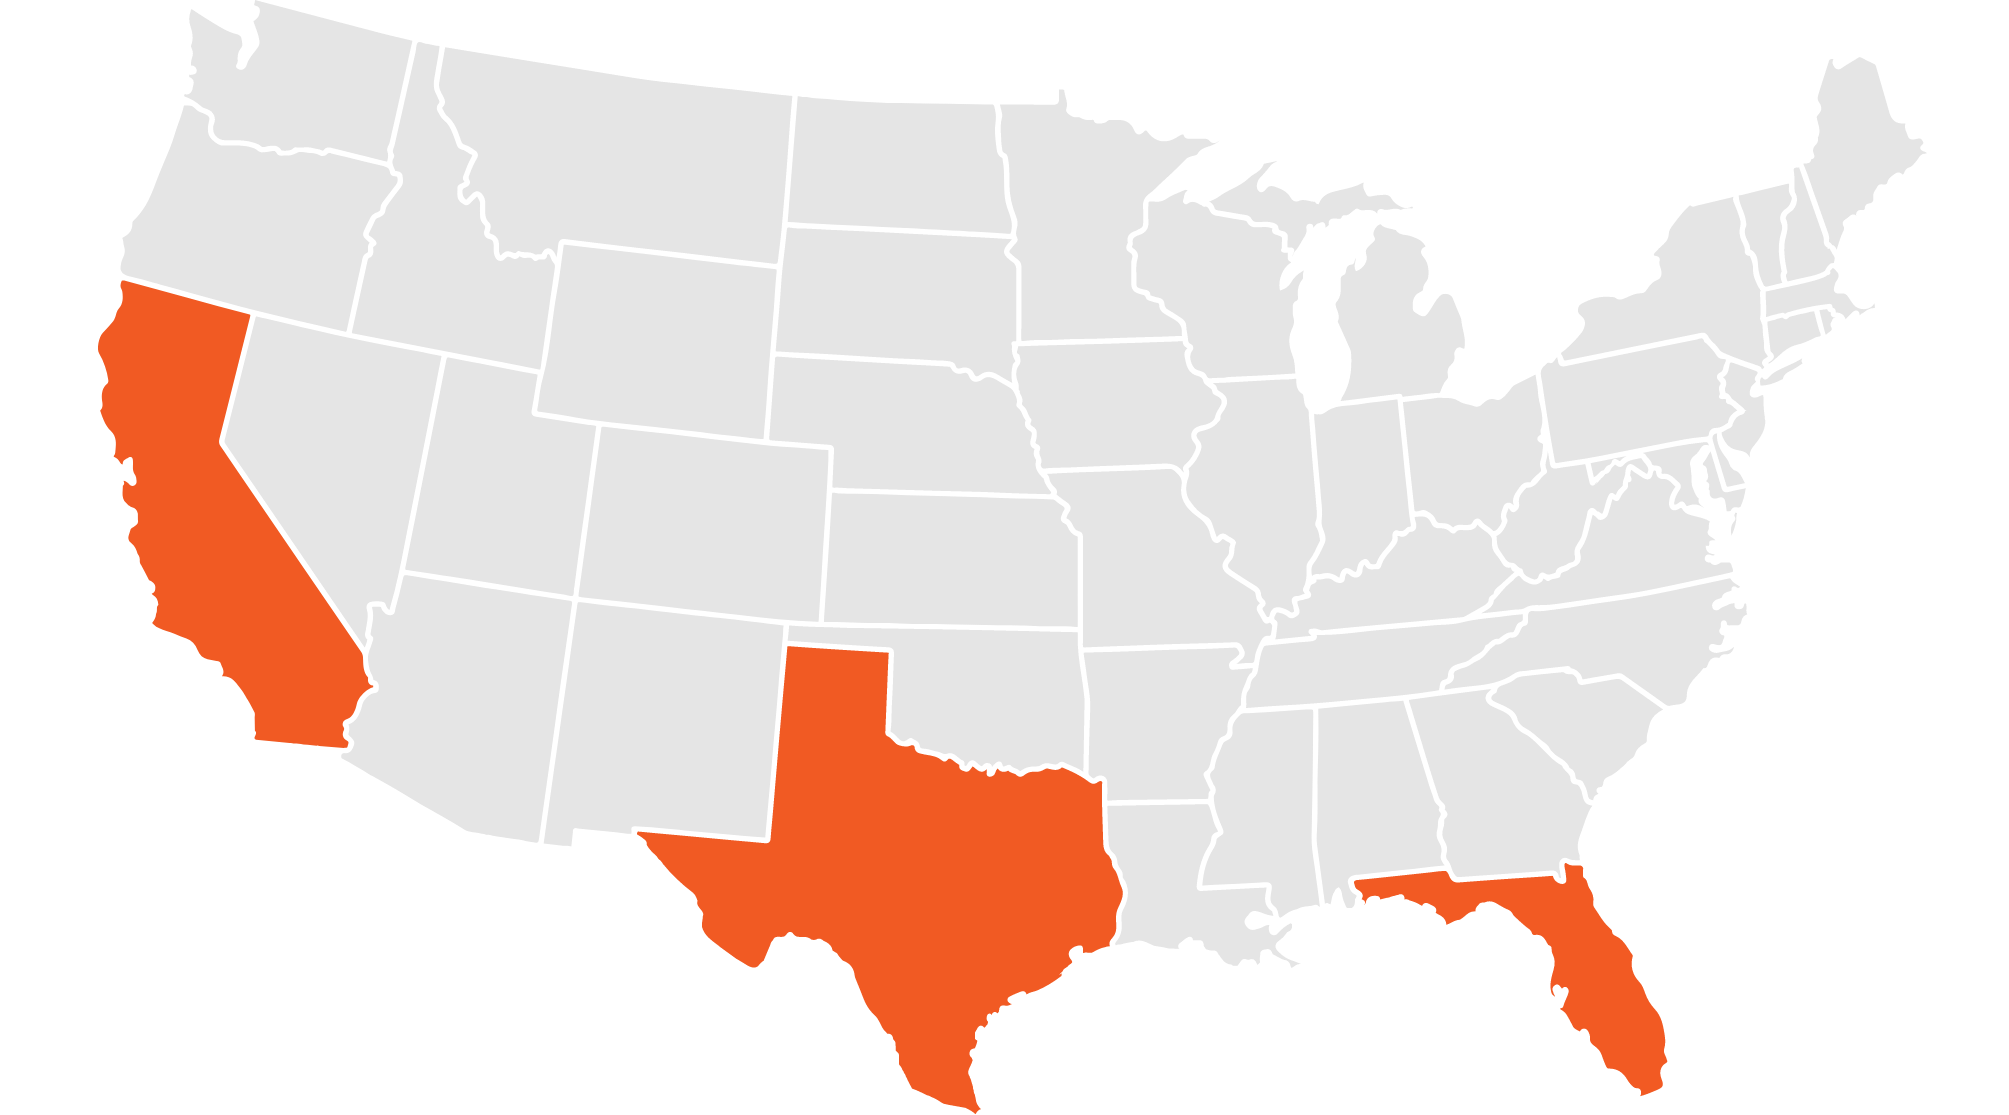 Map of the USA with California, Florida, and Texas highlighted